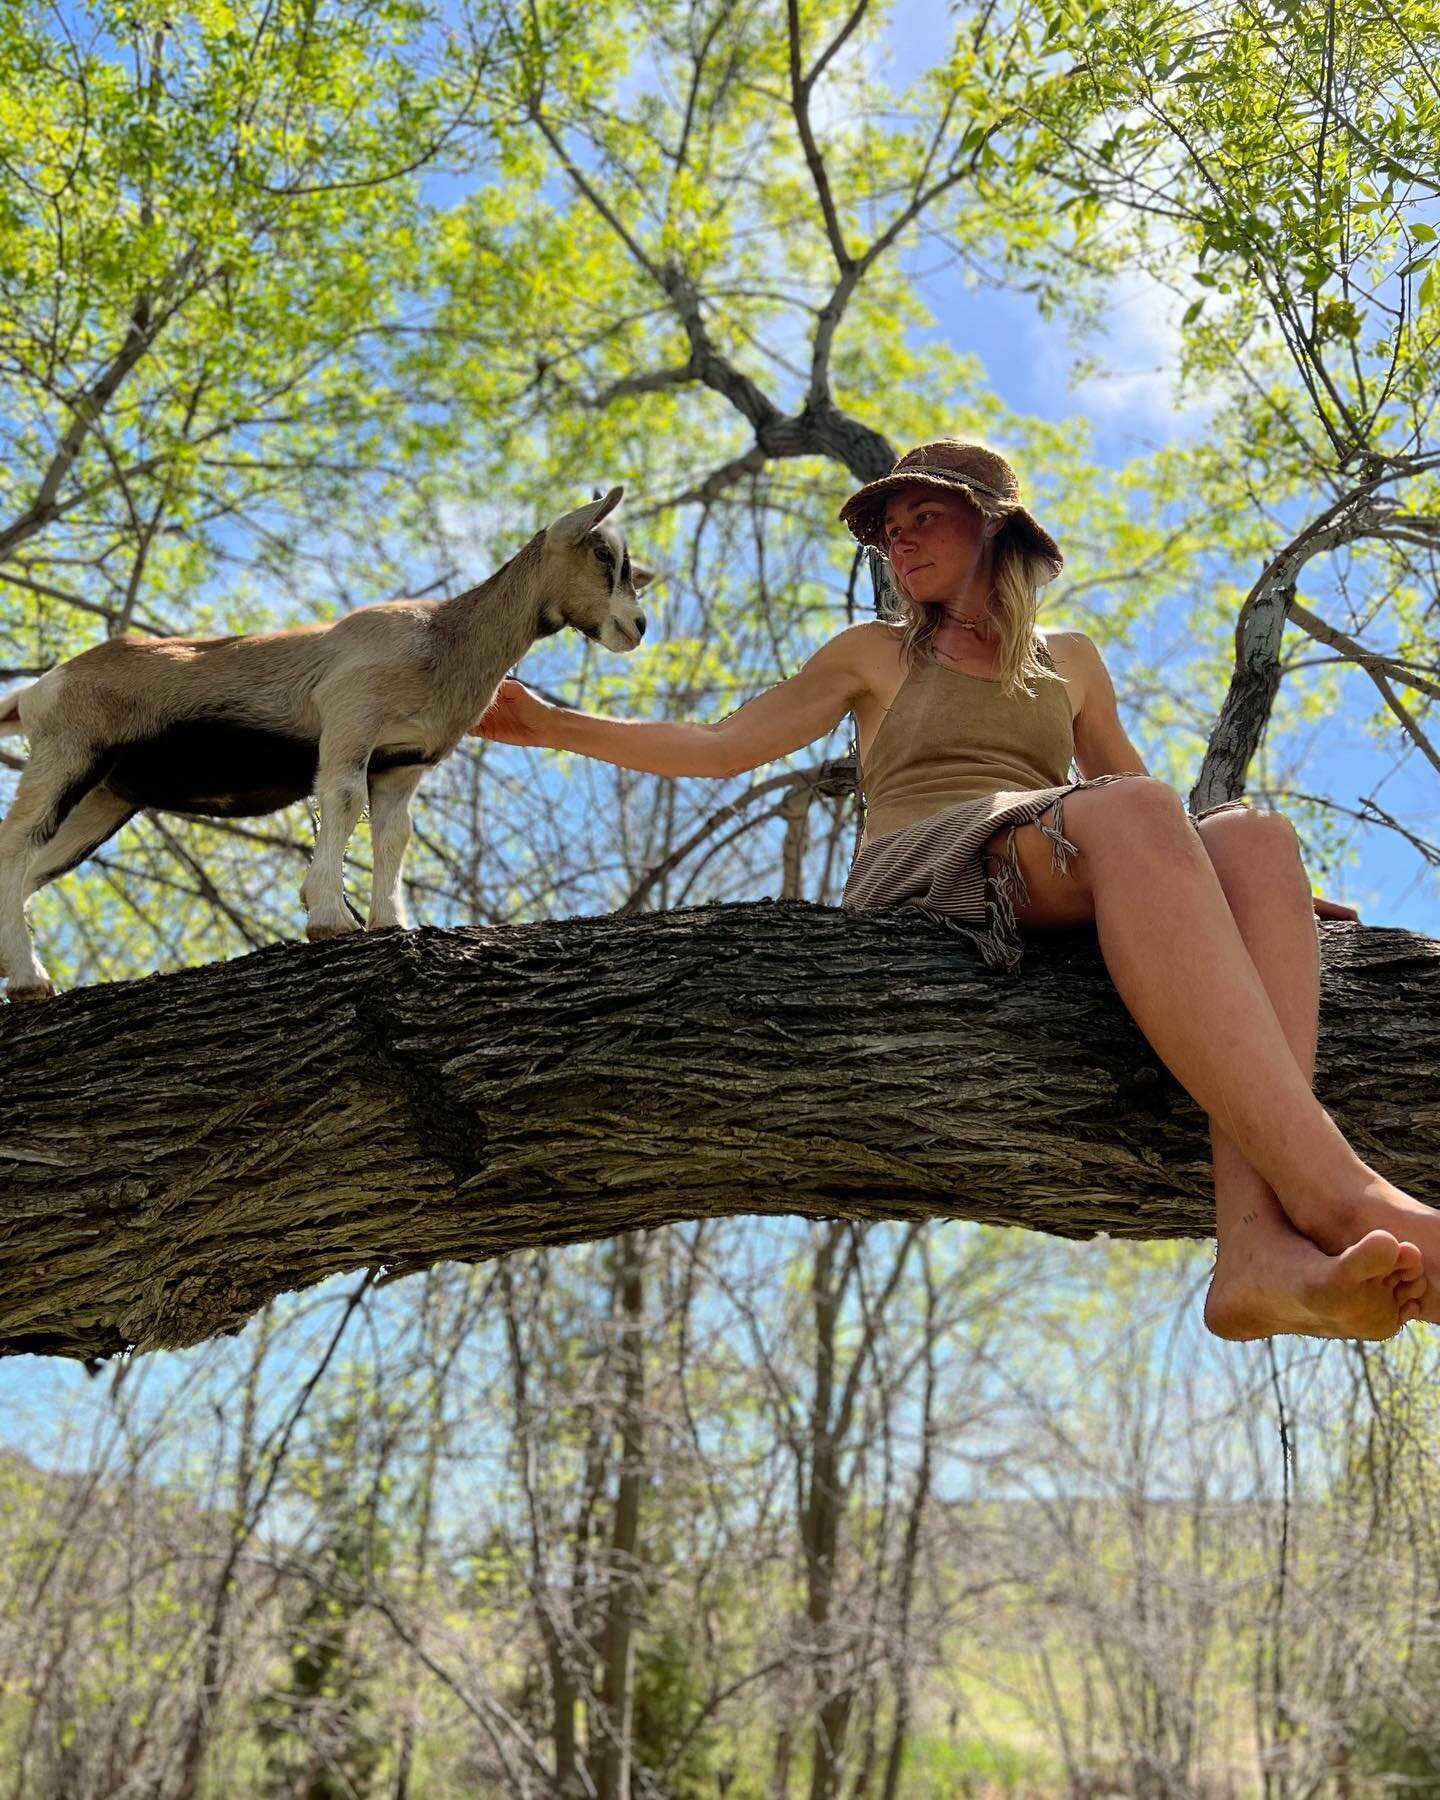 Animals are good medicine. 

There always seems like there is a lot to do, but the kids remind me to take a break from the endless &ldquo;to-do&rsquo;s&rdquo; and play. 

Come on kids let&rsquo;s climb some trees!

#goatmedicine 
#stopdropandplay
#go